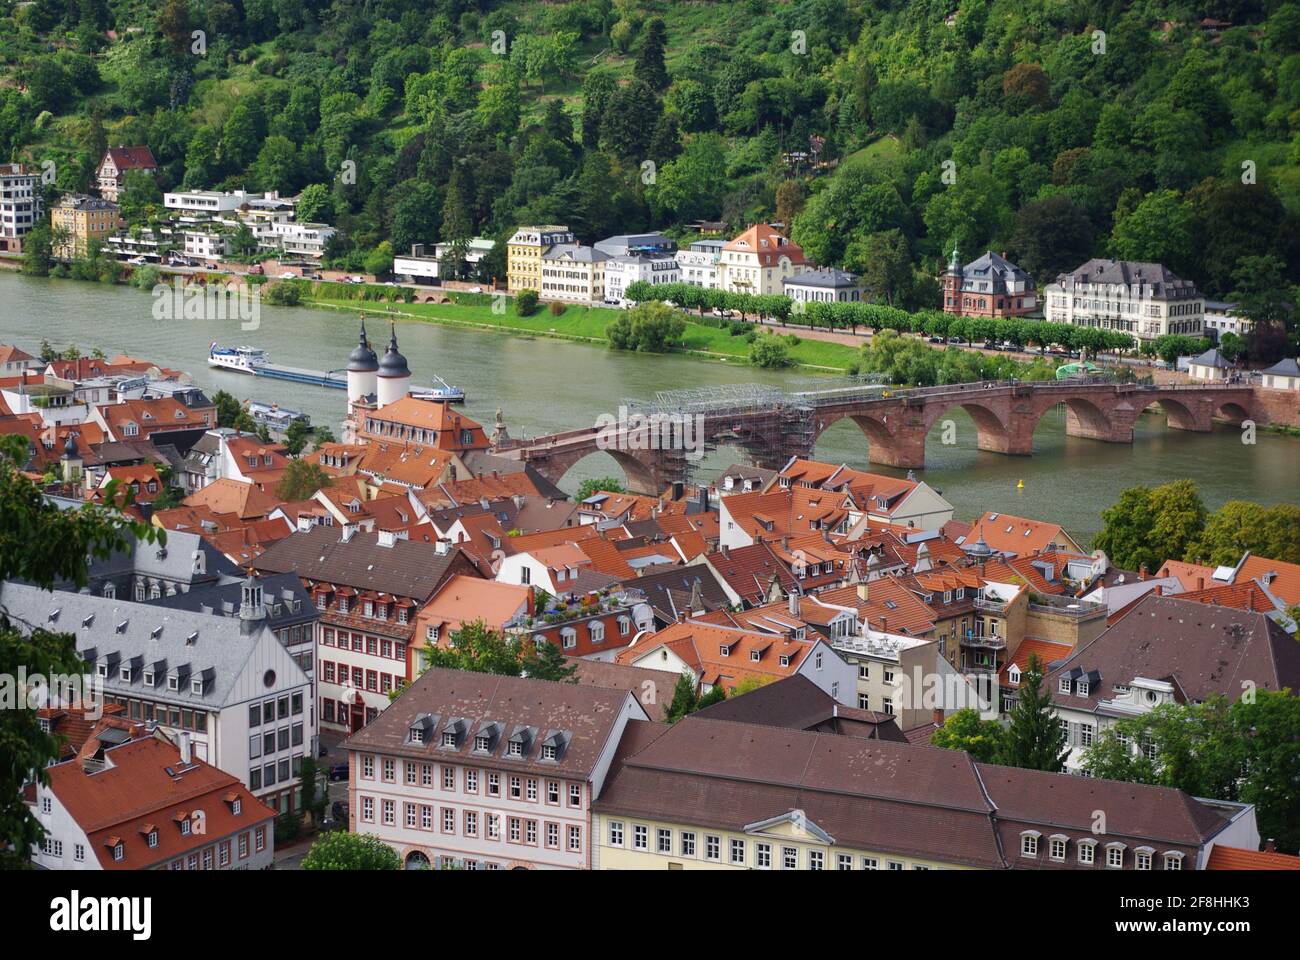 Aerial view of the City, River Neckar and the old bridge gate’s twin towers taken from the castle, Heidelberg, Baden-Württemberg, Germany Stock Photo